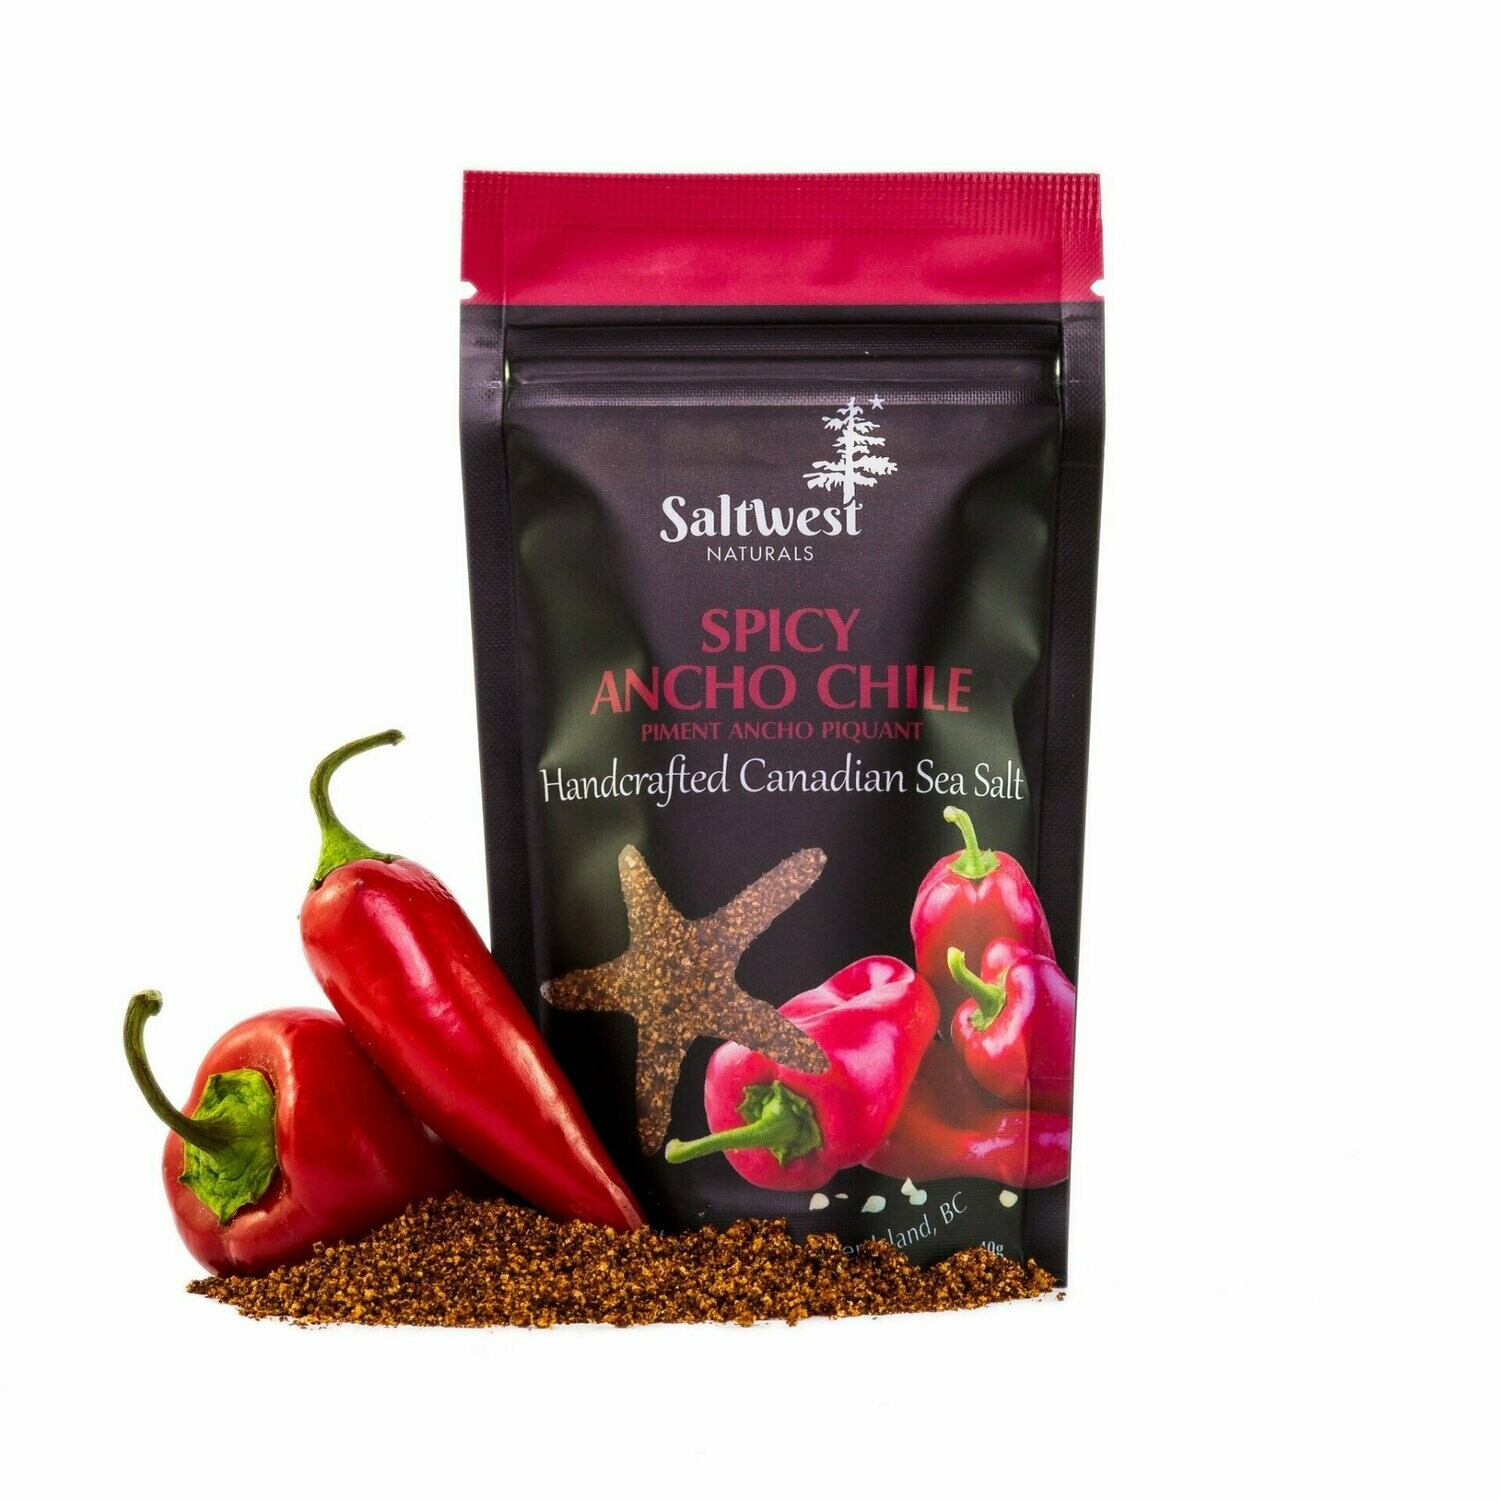 Spicy Ancho Chile Sea Salt